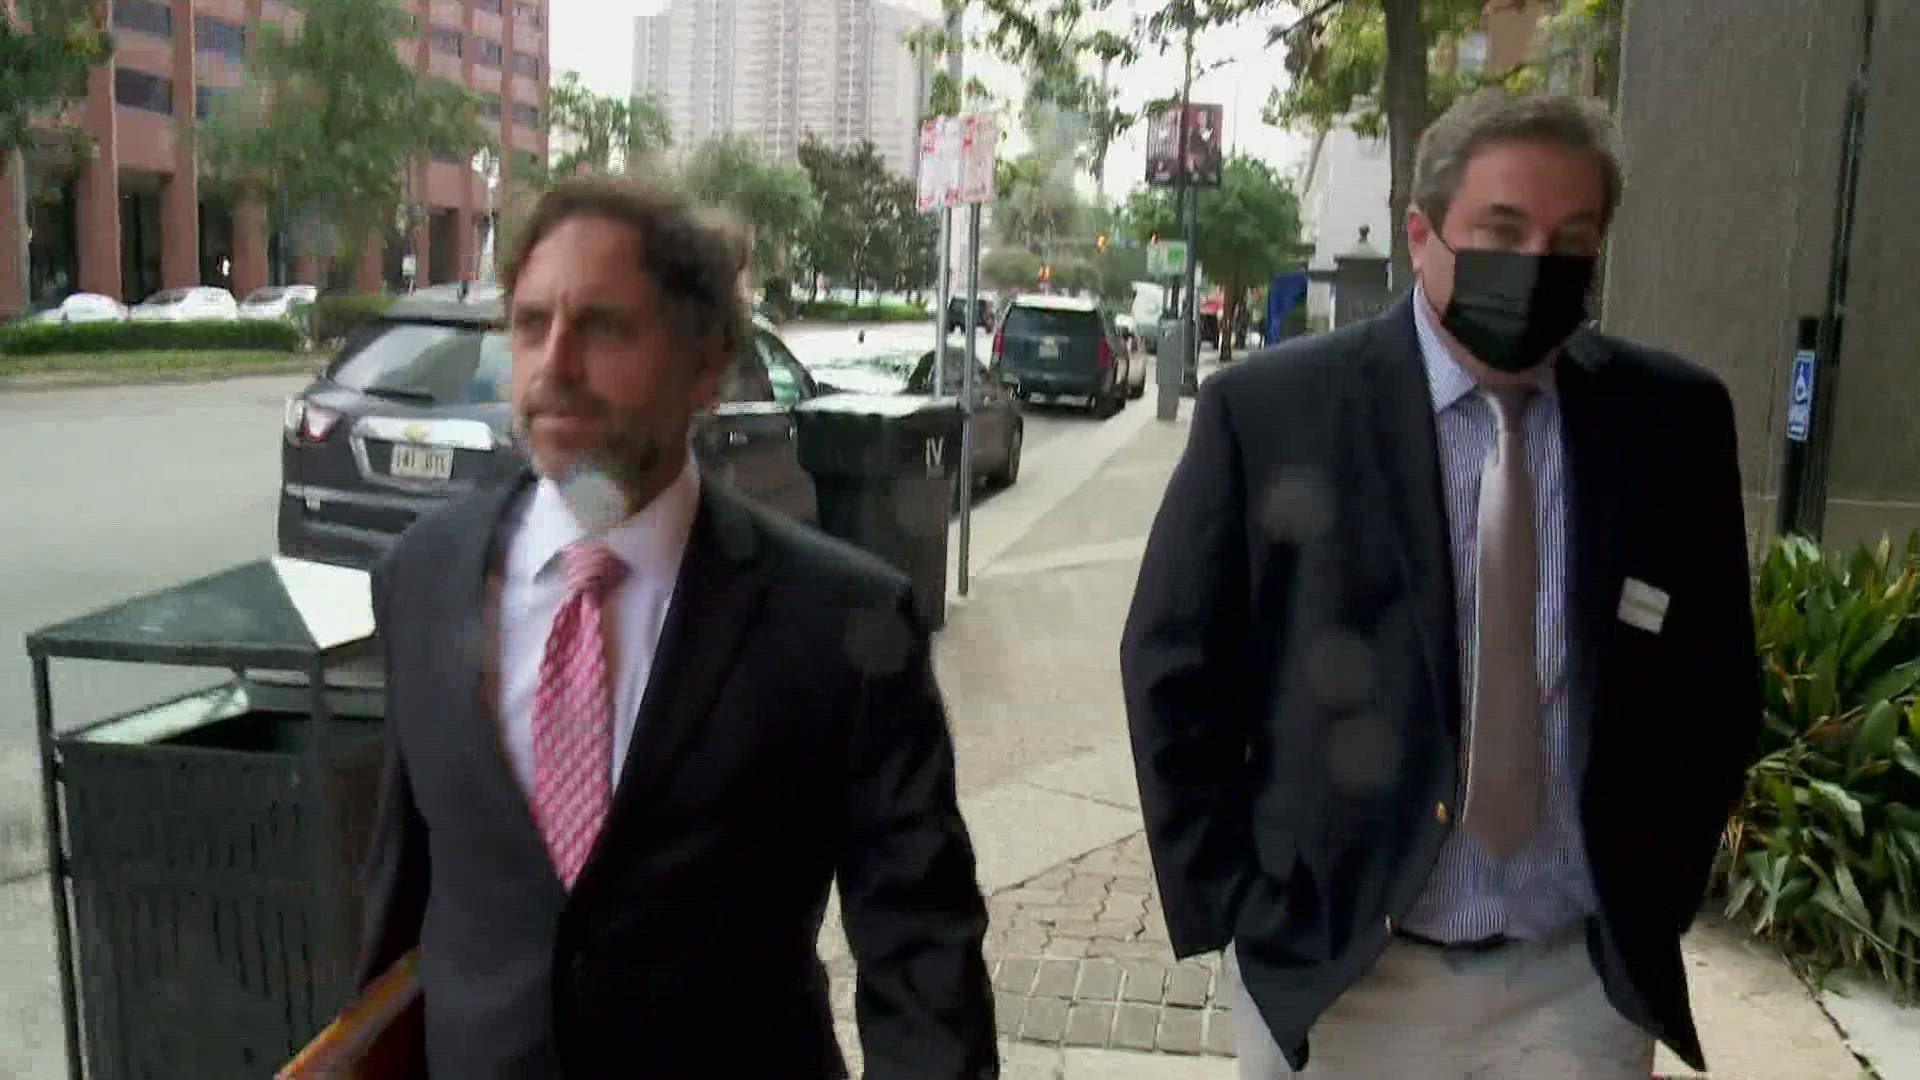 Brian Medus pleaded guilty to his role in a bribery scheme that started in 2011